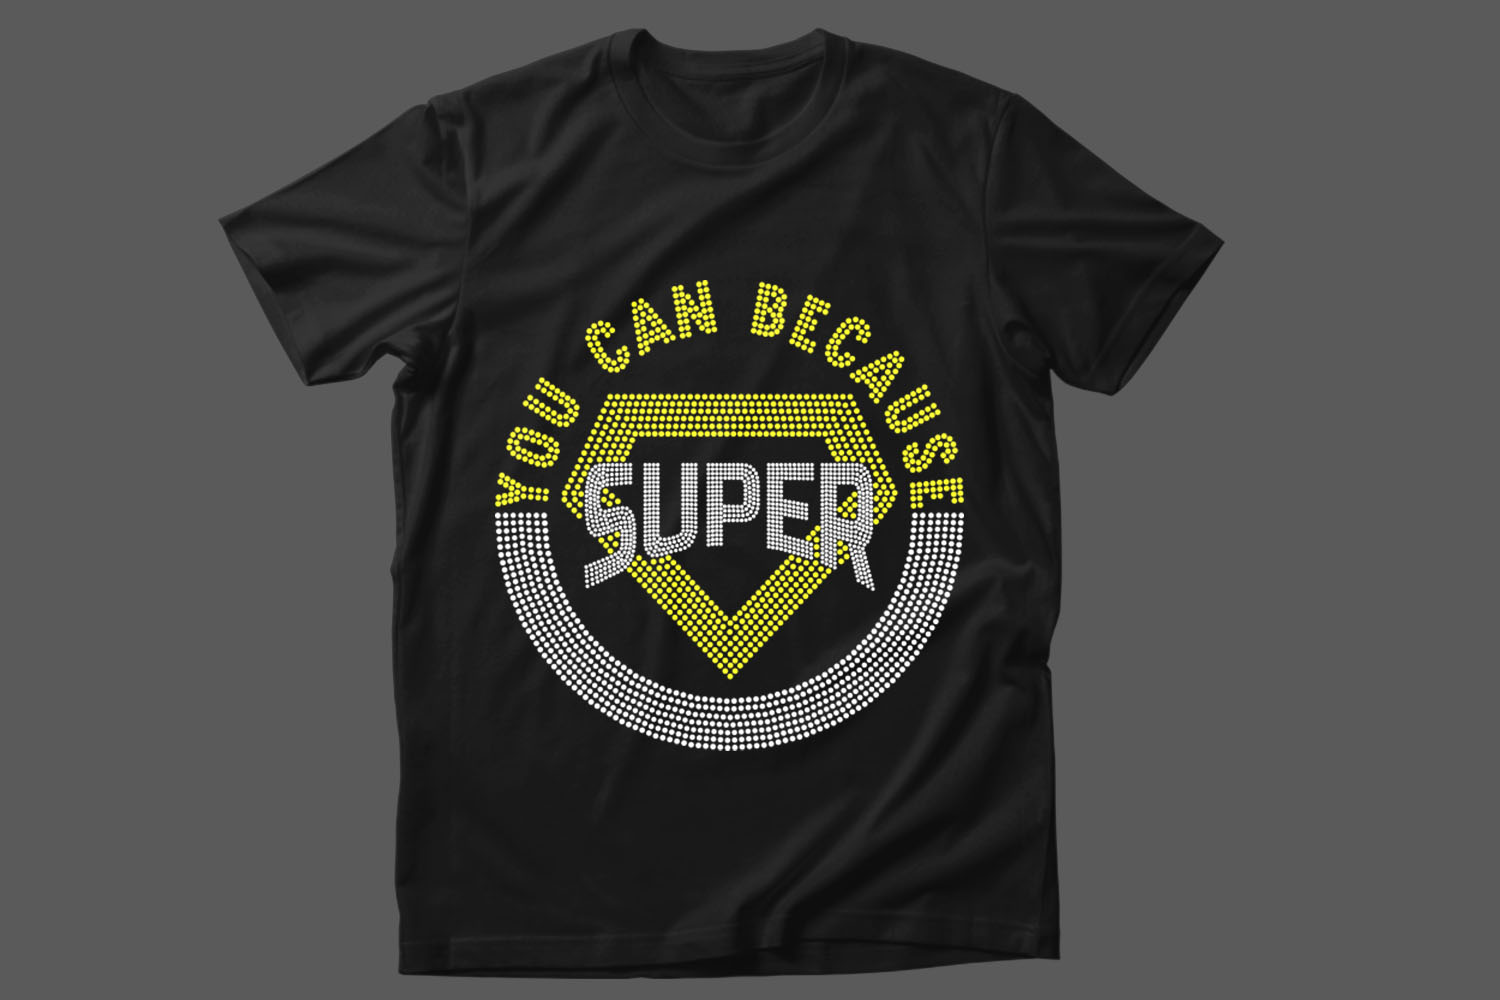 Image of a black t-shirt with an irresistible inscription You Can Because Super